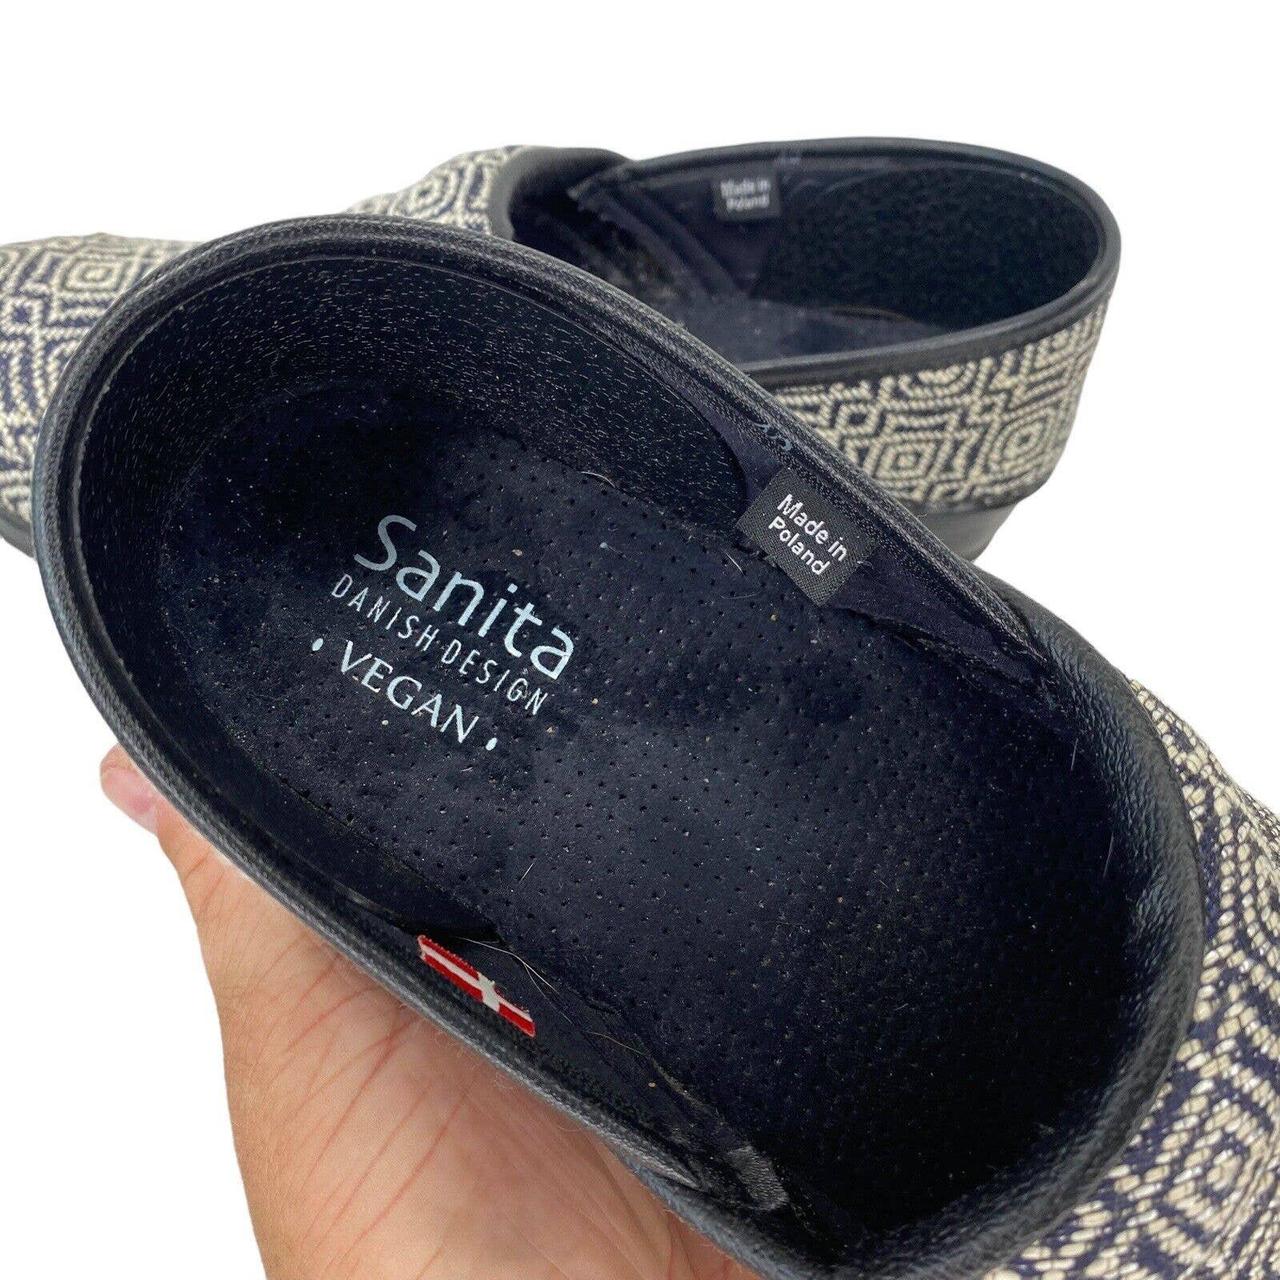 Product Image 3 - These Sanita clogs are in